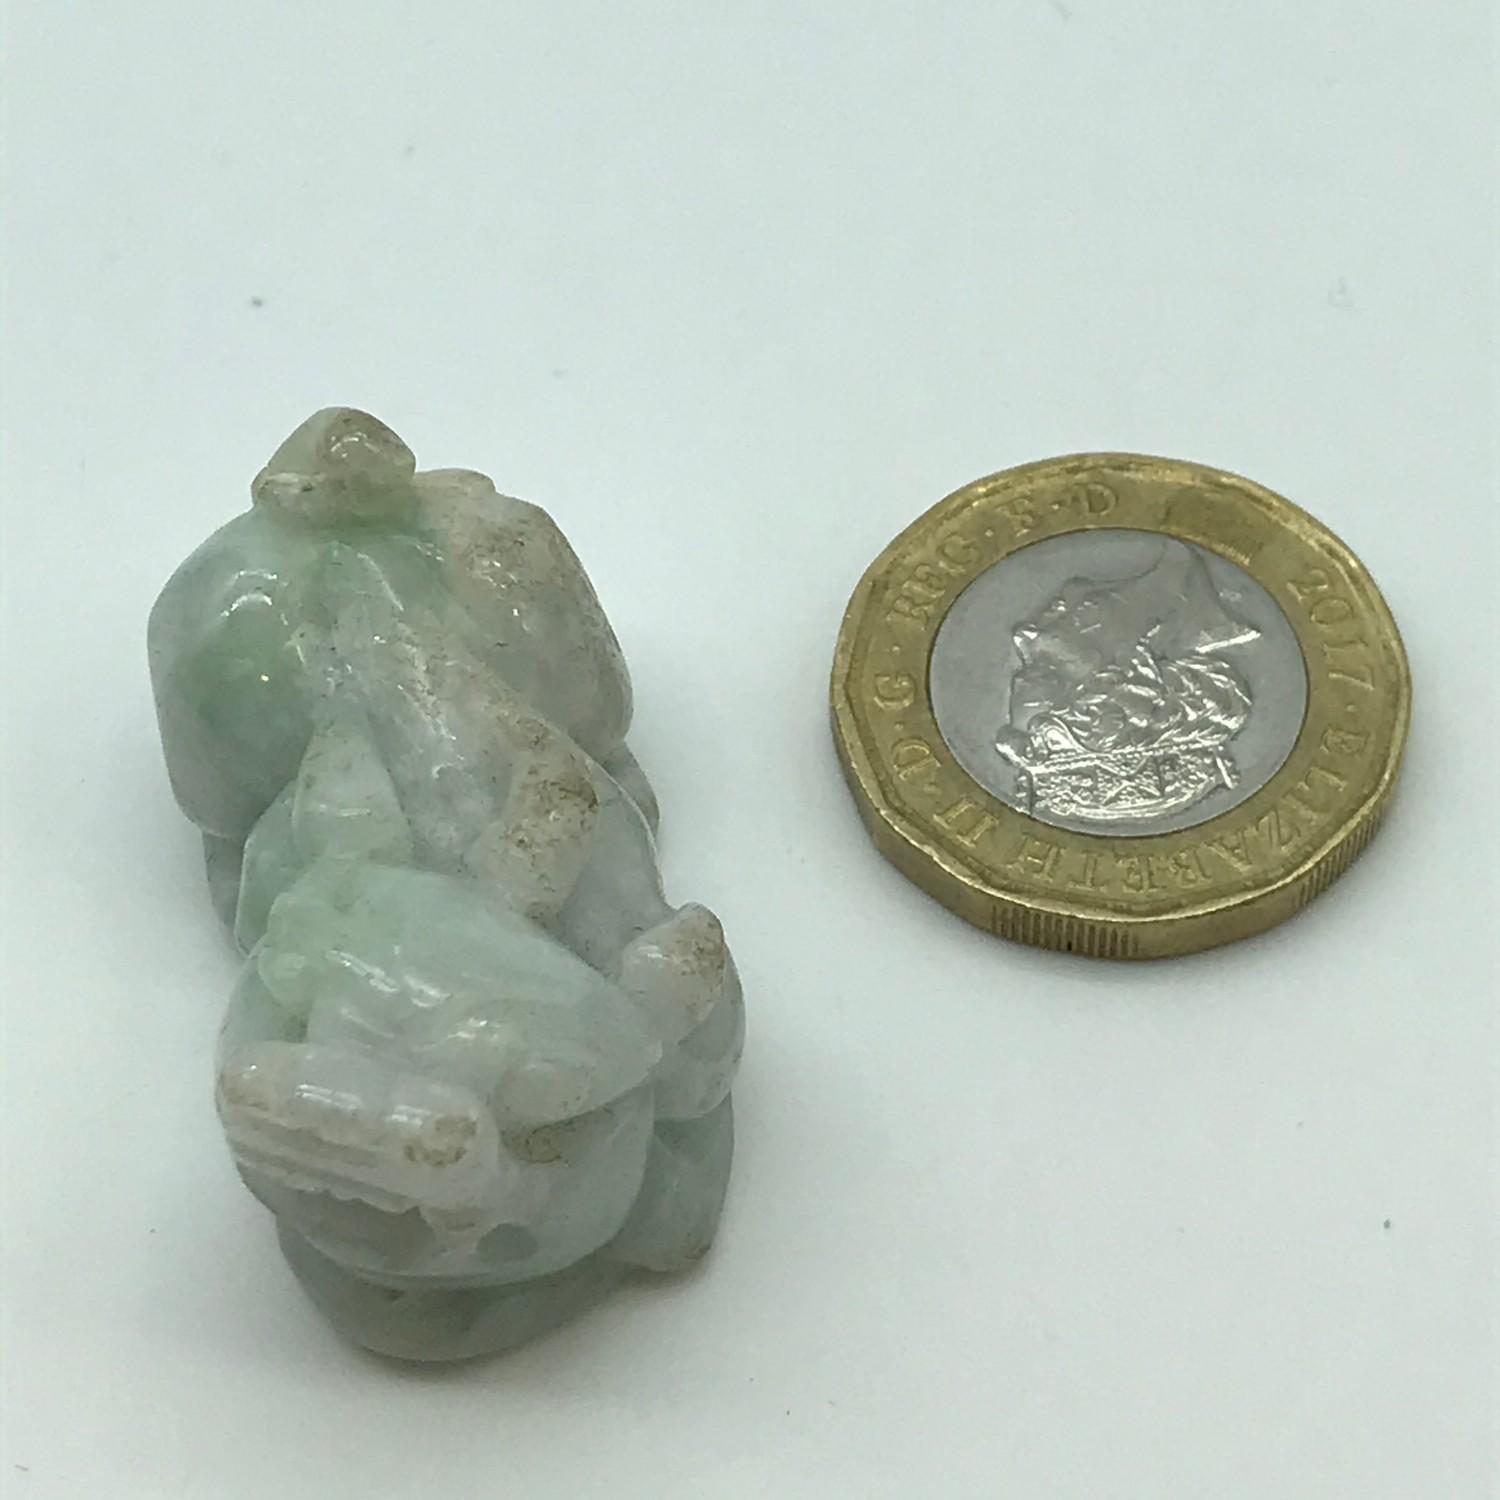 Antique Chinese hand carved jade foo dog sculpture [Measures 3.3 cm in length] - Image 4 of 4